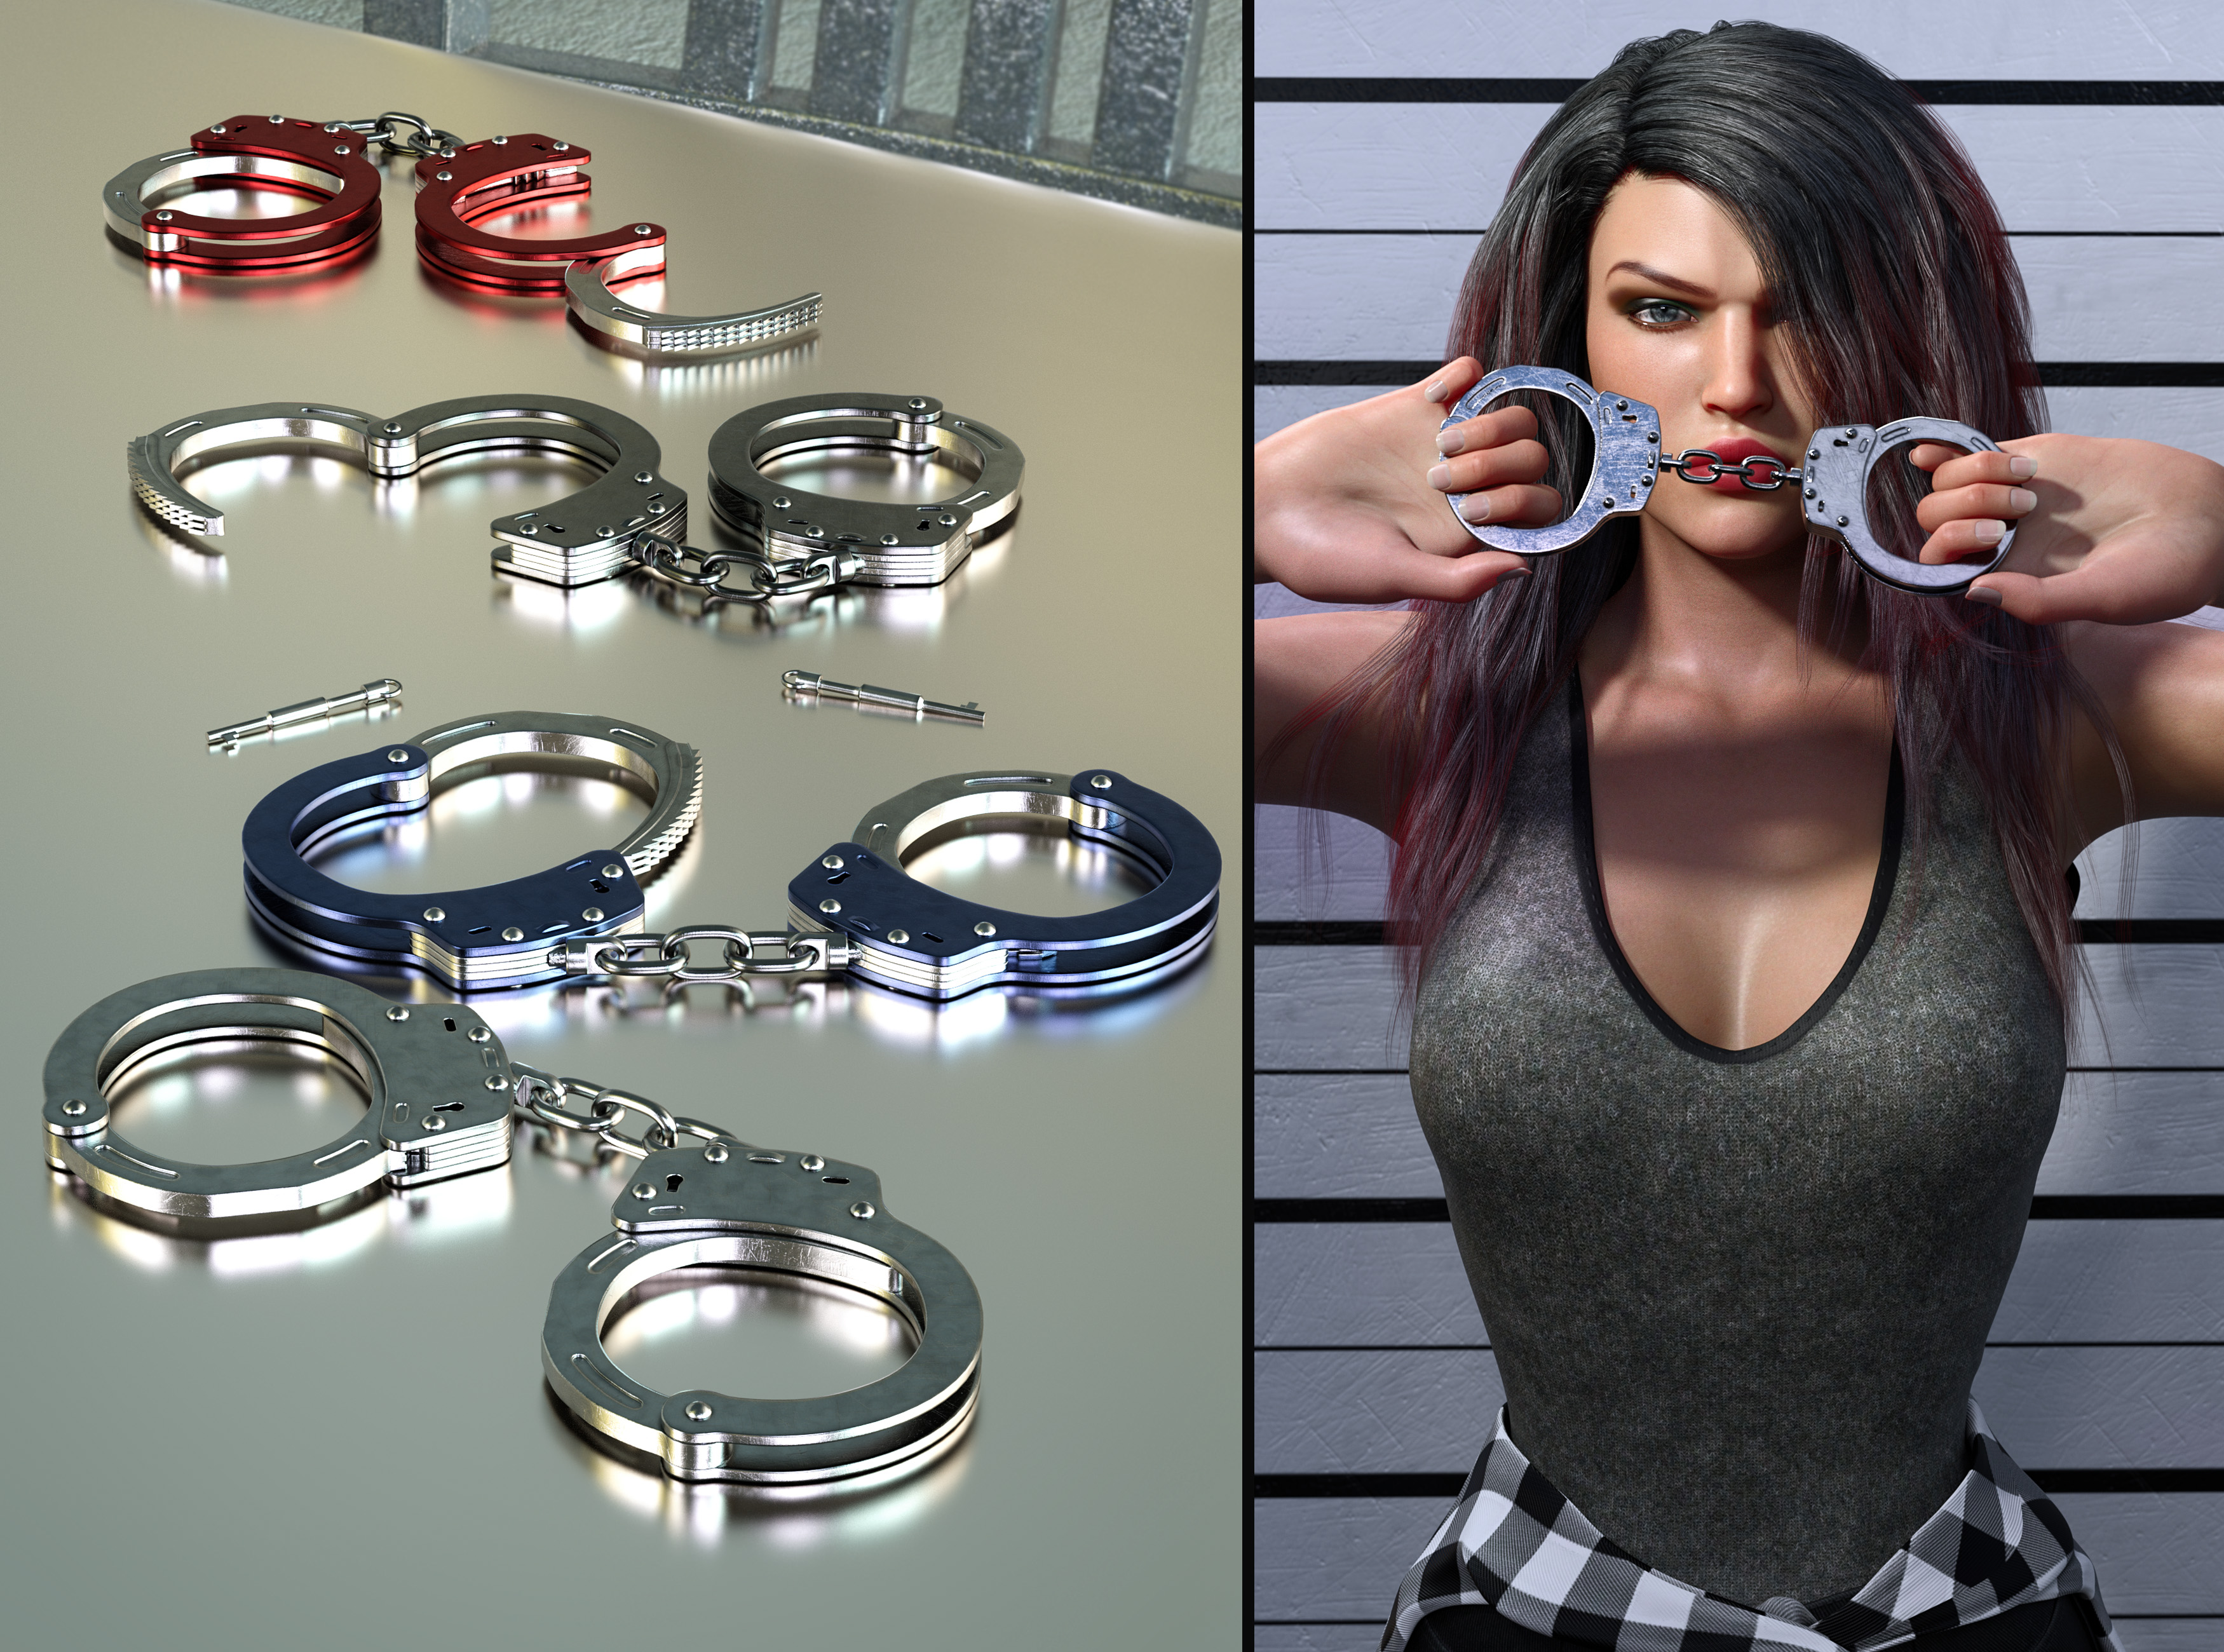 Z In Handcuffs - Prop and Poses for Genesis 8 and 8.1 by: Zeddicuss, 3D Models by Daz 3D